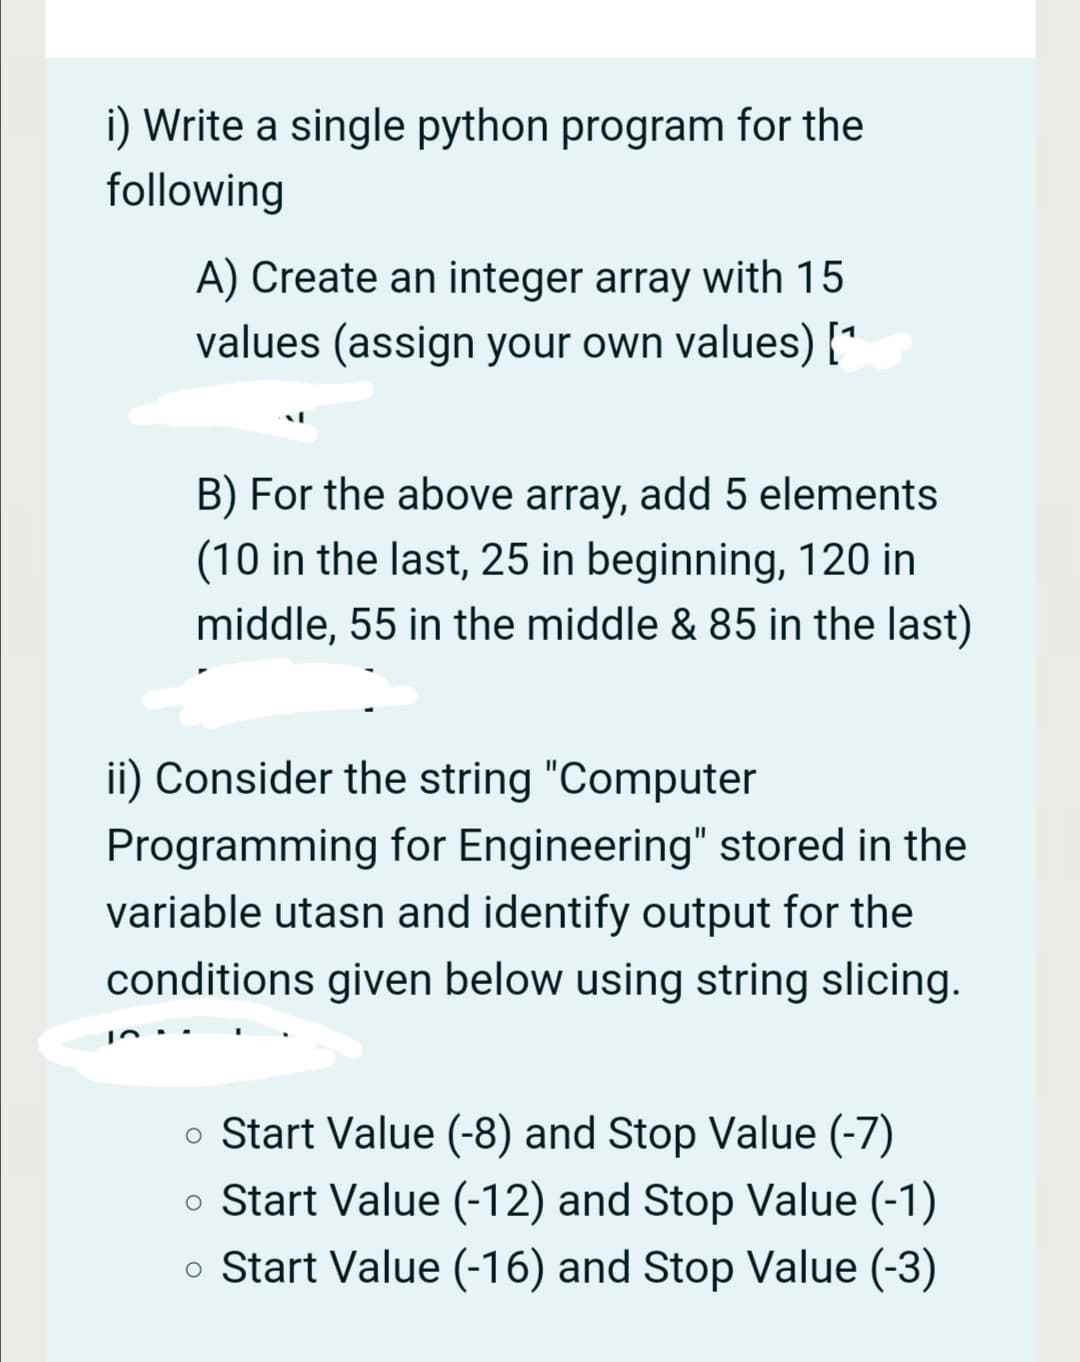 i) Write a single python program for the
following
A) Create an integer array with 15
values (assign your own values) [*
B) For the above array, add 5 elements
(10 in the last, 25 in beginning, 120 in
middle, 55 in the middle & 85 in the last)
ii) Consider the string "Computer
Programming for Engineering" stored in the
variable utasn and identify output for the
conditions given below using string slicing.
o Start Value (-8) and Stop Value (-7)
o Start Value (-12) and Stop Value (-1)
o Start Value (-16) and Stop Value (-3)
